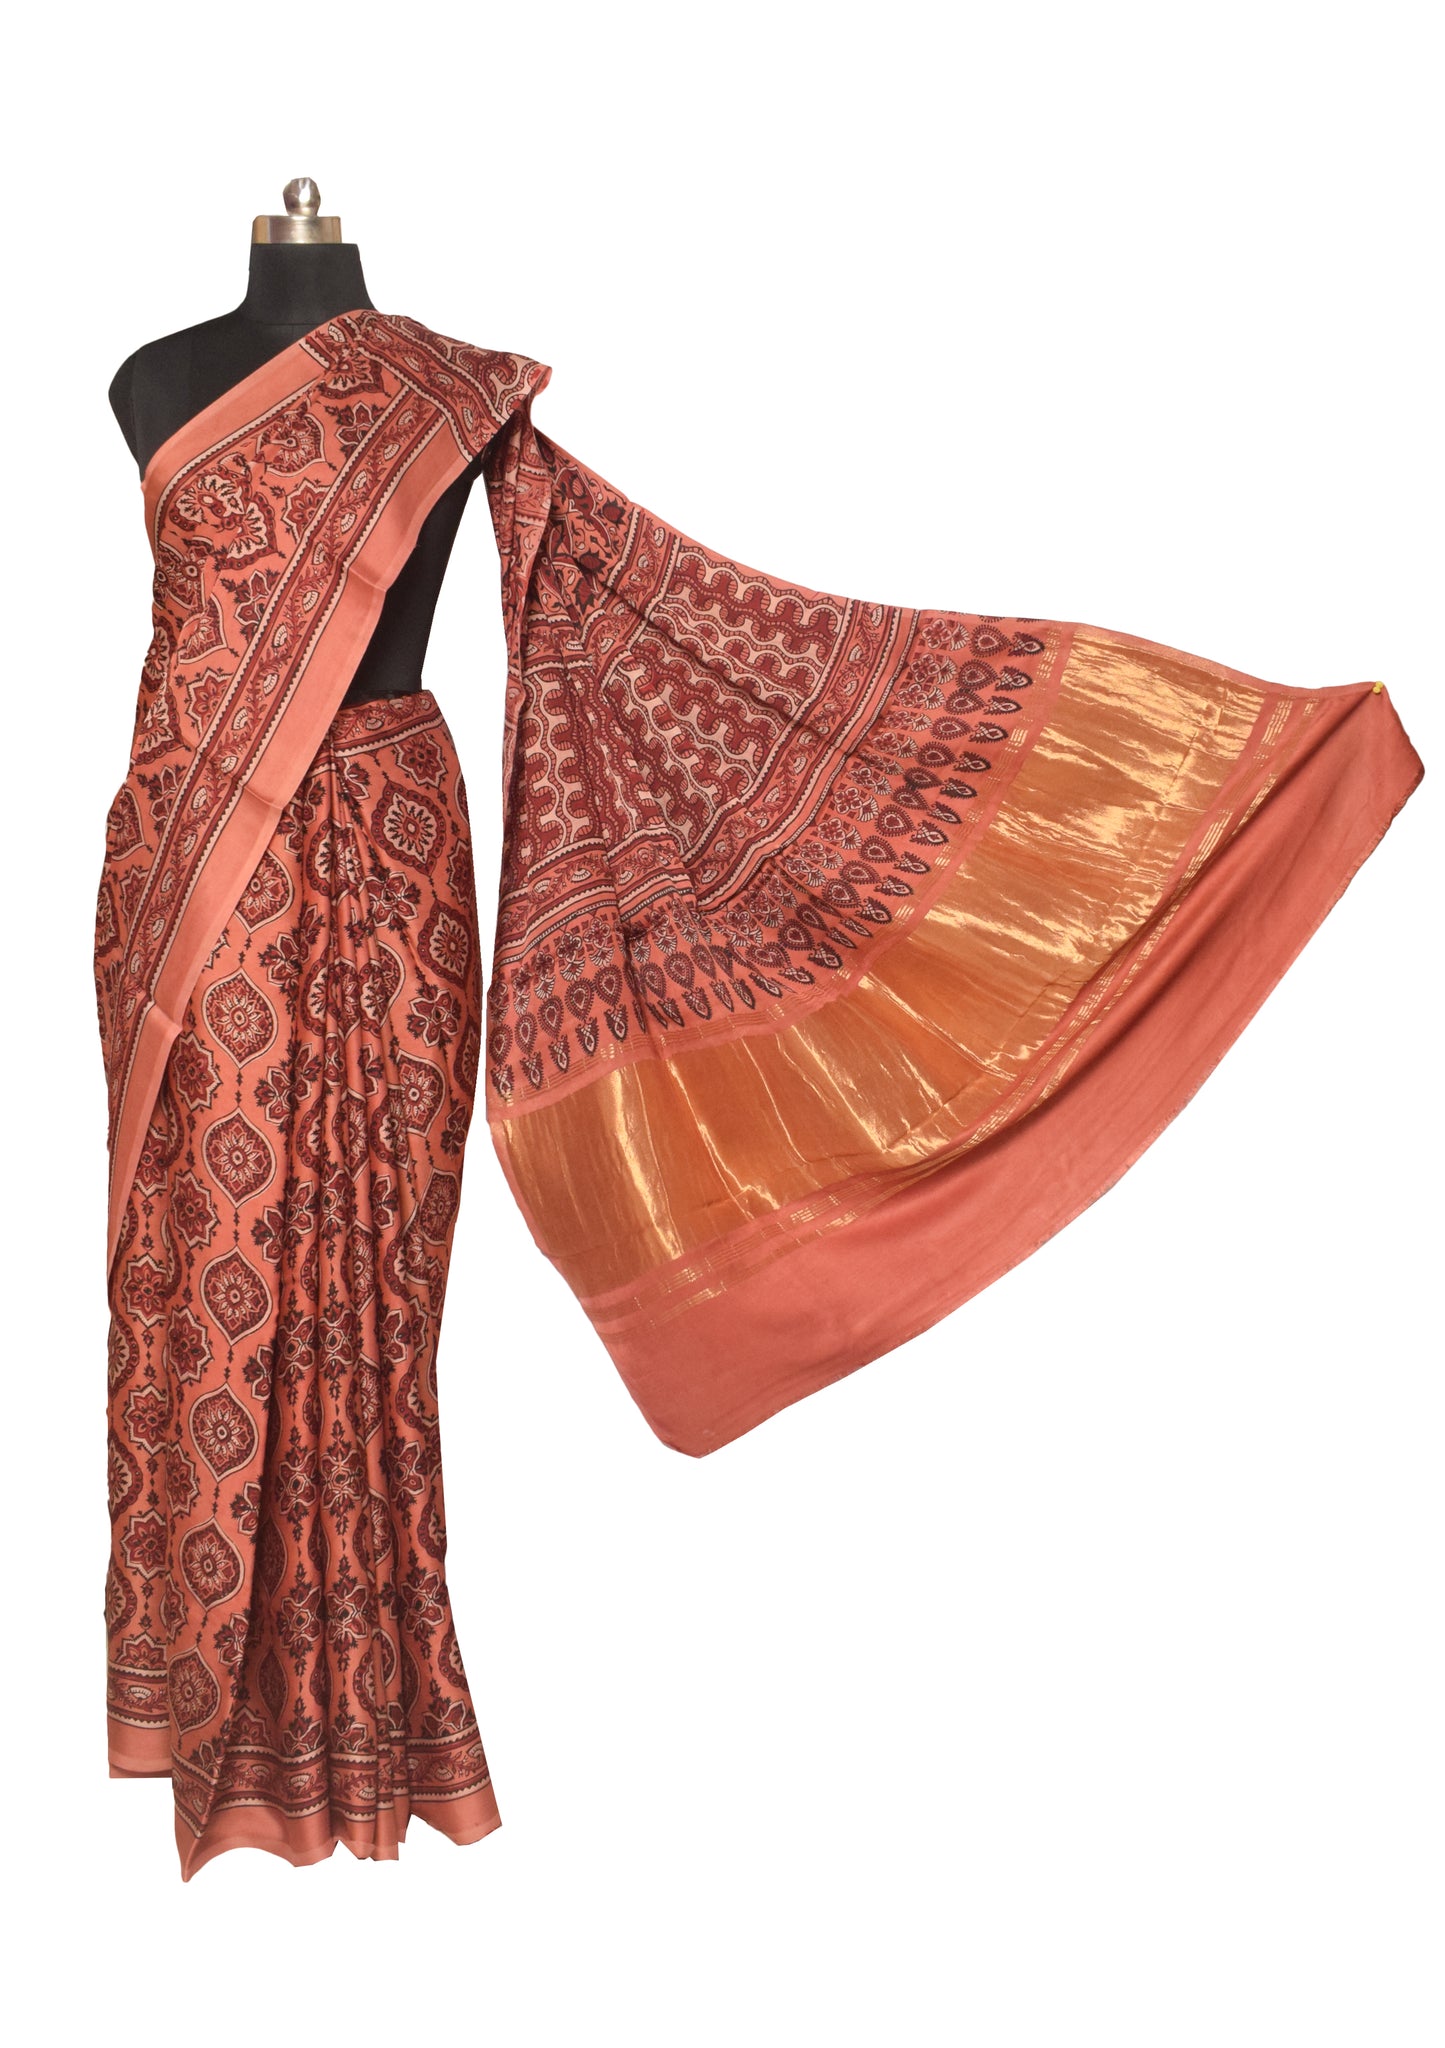 Ajrakh Modal Silk Natural Dye Hand Block Print Saree   With Golden Border  - With Blouse Piece - 6 mtrs Length    -  SKU : ID28C03O